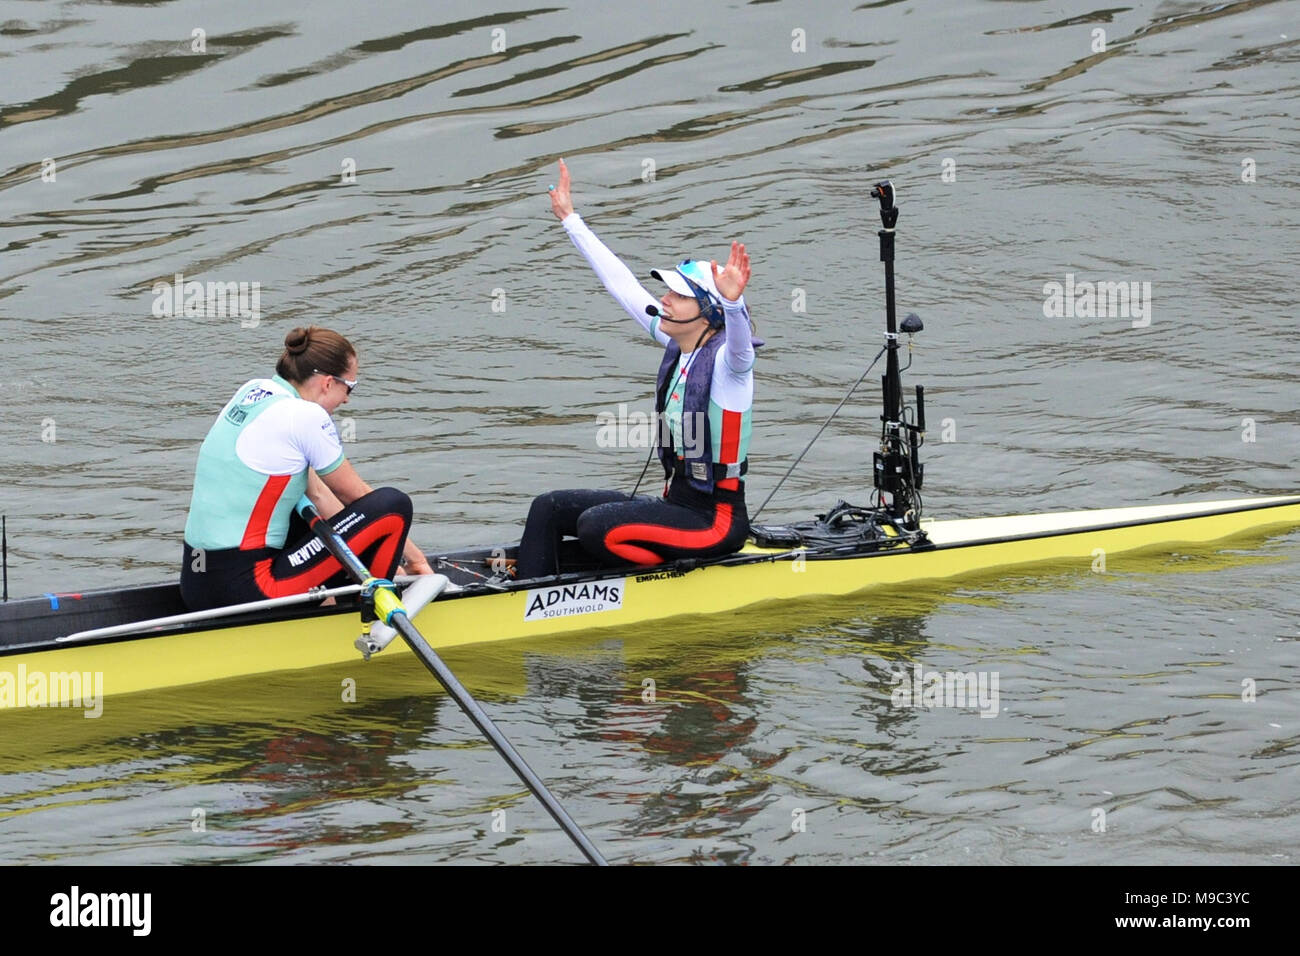 London, UK, 24 Mar 2018. Sophie Shapter, Cambridge Cox (GBR, St Catharine’s) celebrating their win just after crossing the finish line in The Cancer Research UK Women’s Boat Race.  The rower to her left is Olivia Coffey (USA, Homerton) the Cambridge boat's Stroke.     Credit: Michael Preston/Alamy Live News Stock Photo